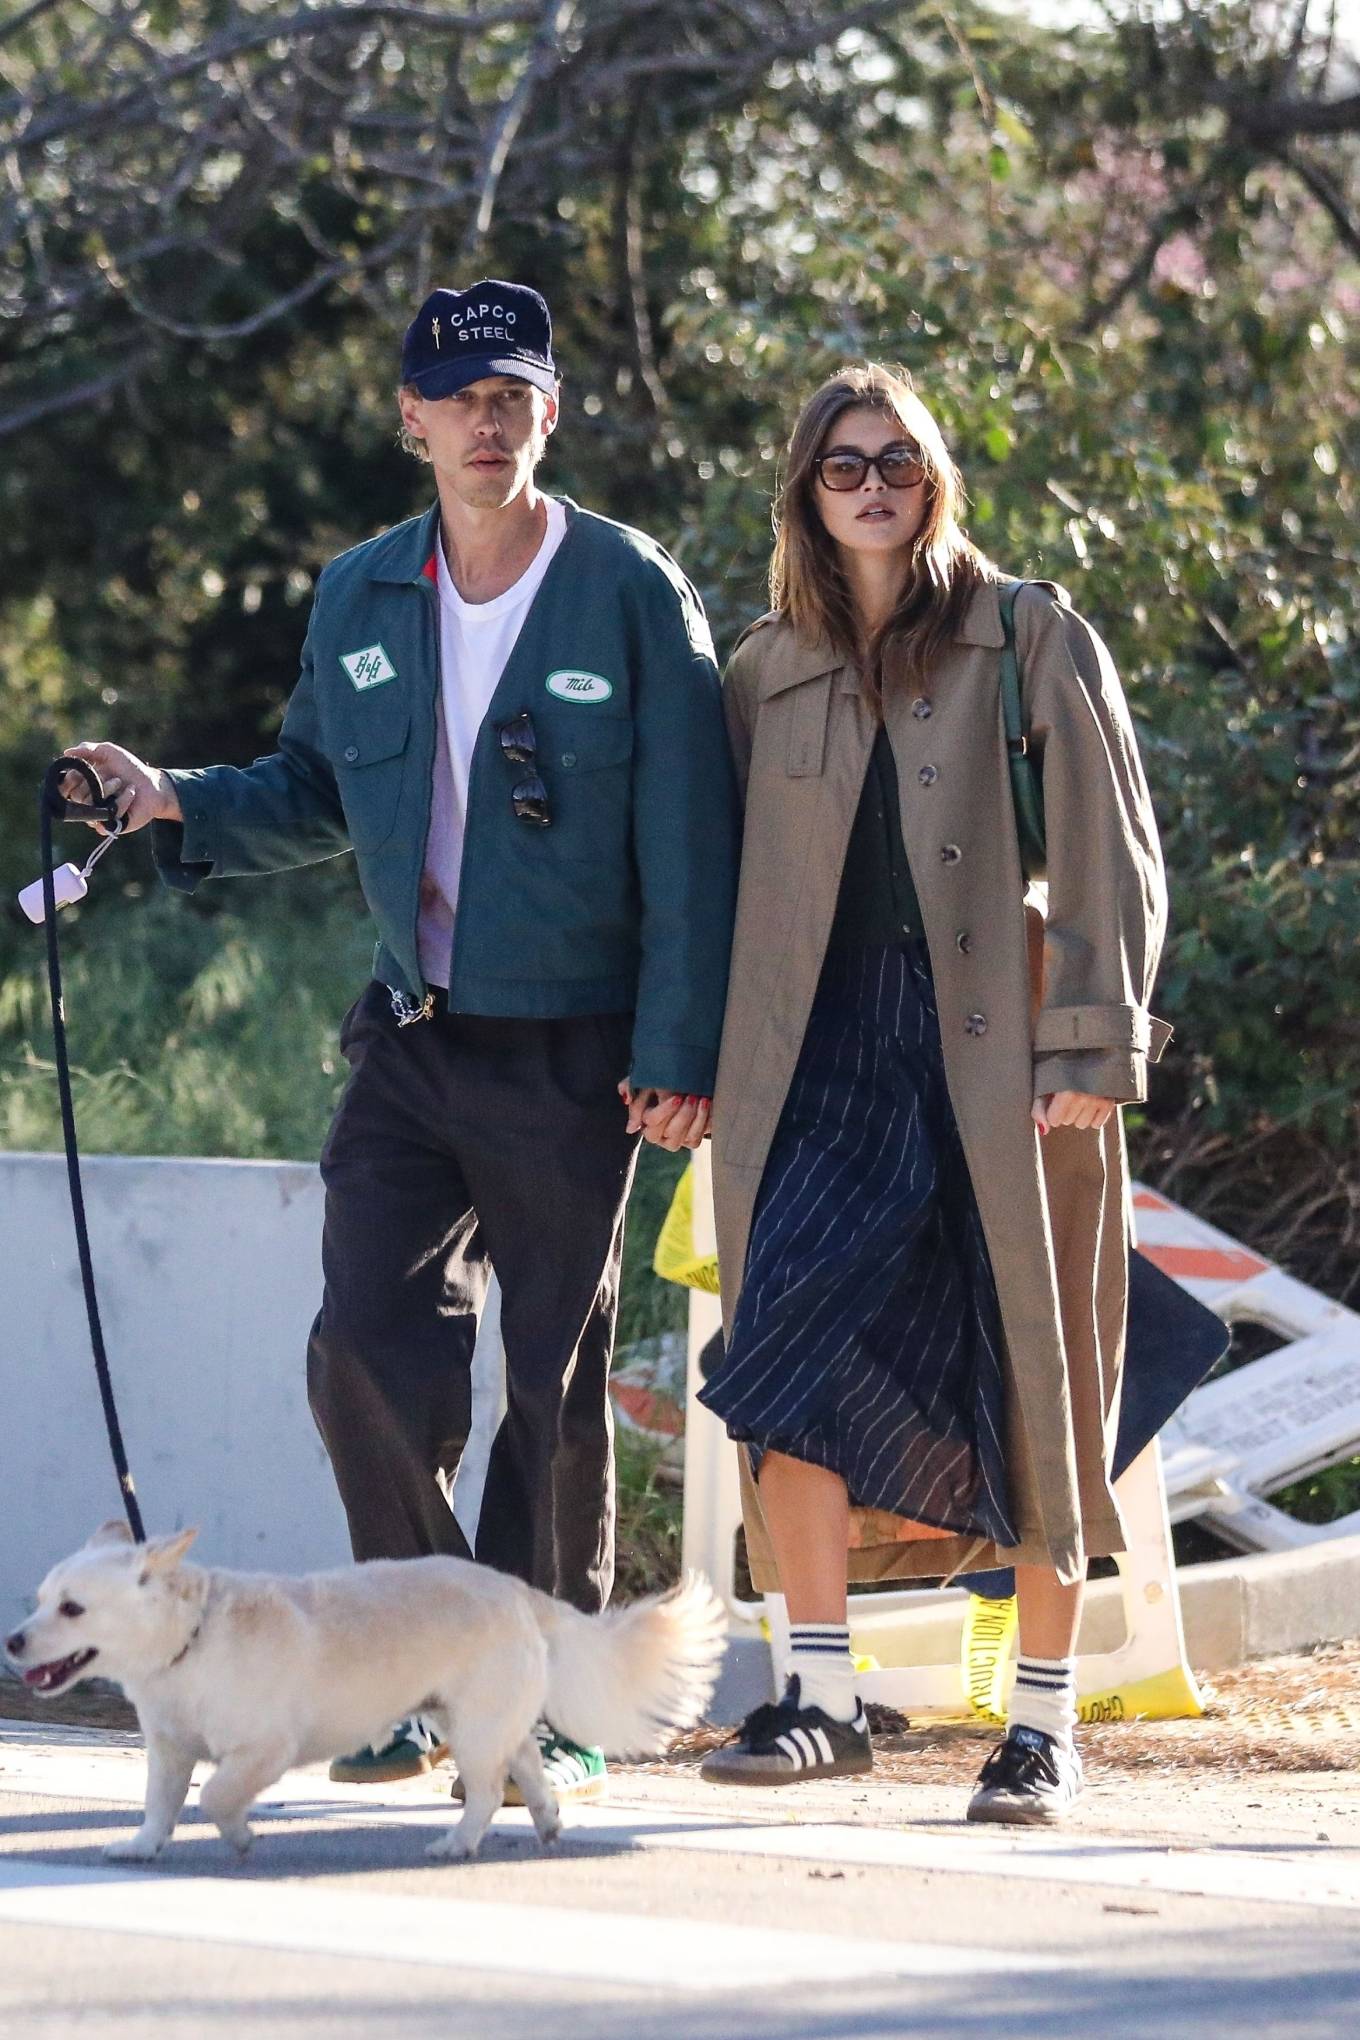 Kaia Gerber - With Austin Butlerin the park with their dog in Silver Lake